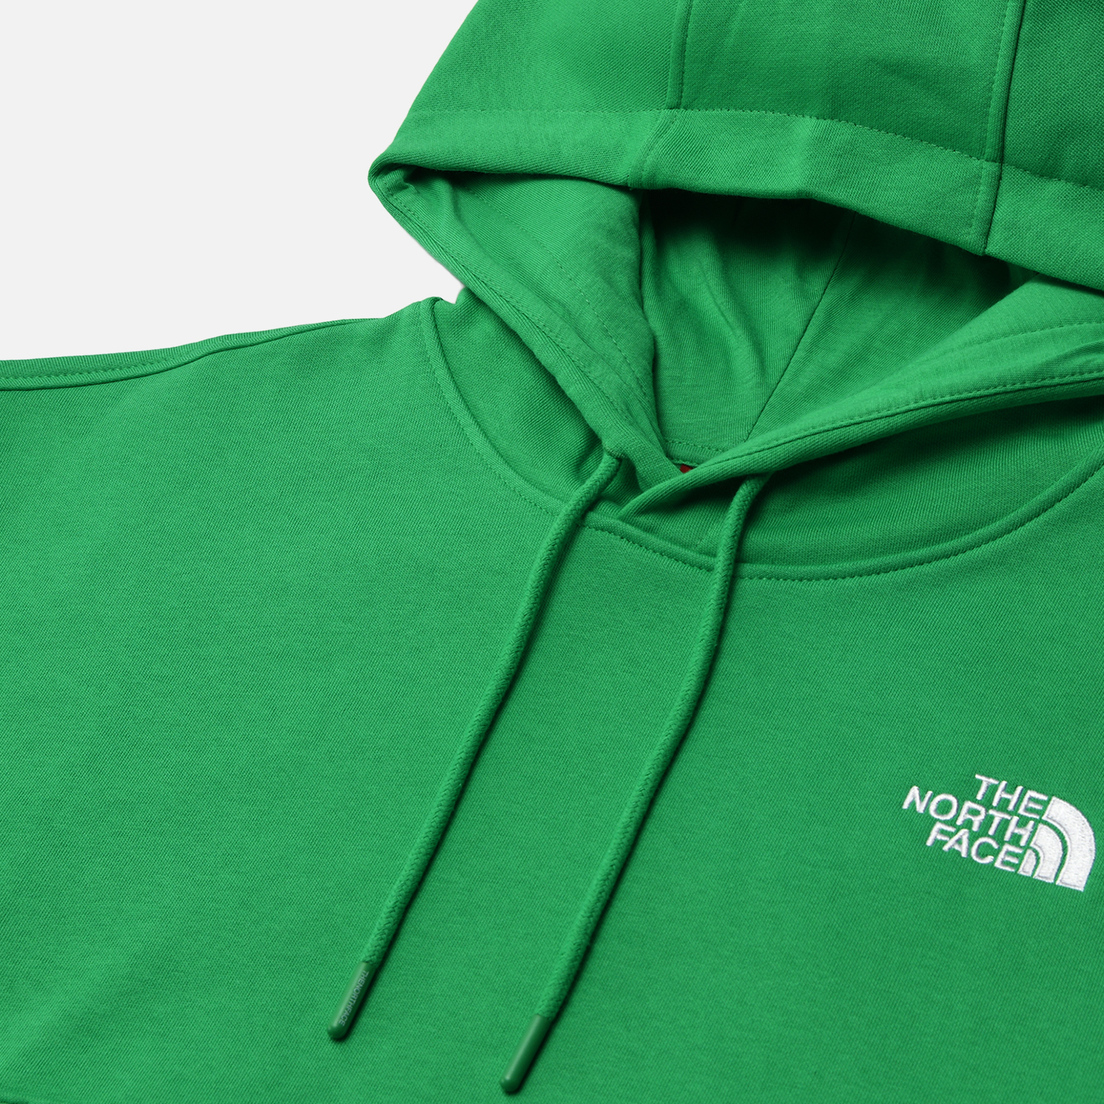 The North Face Женская толстовка Essential Hoodie